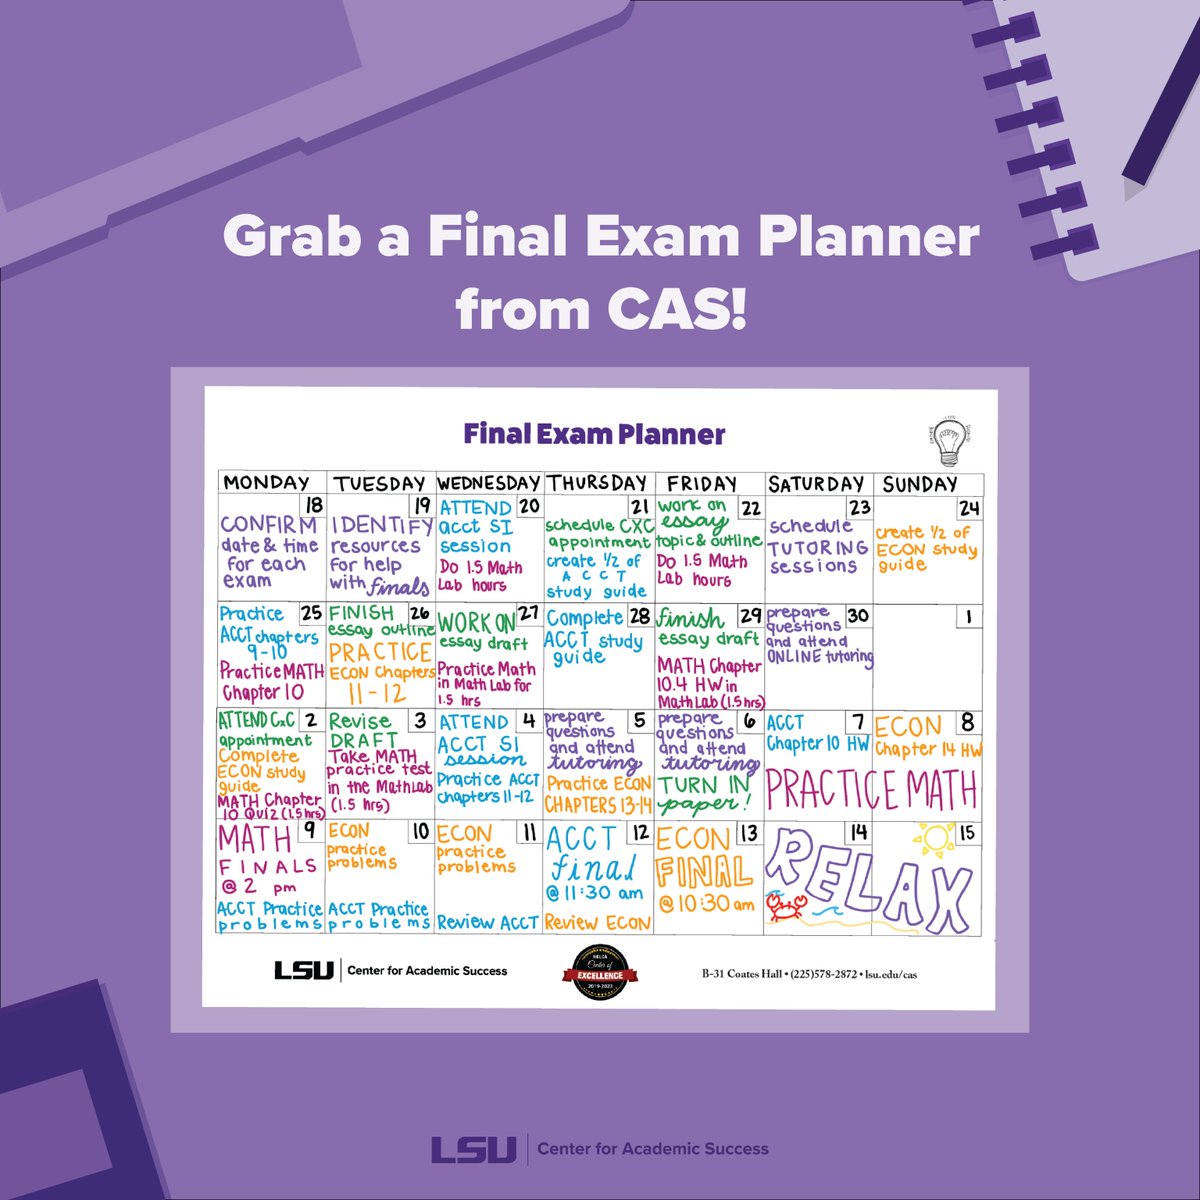 Have you grabbed your Final Exam Planner yet? Don't wait, finals are almost here! Physical copies available in the CAS office (Coates B-31), digital copies available on our website. 💡